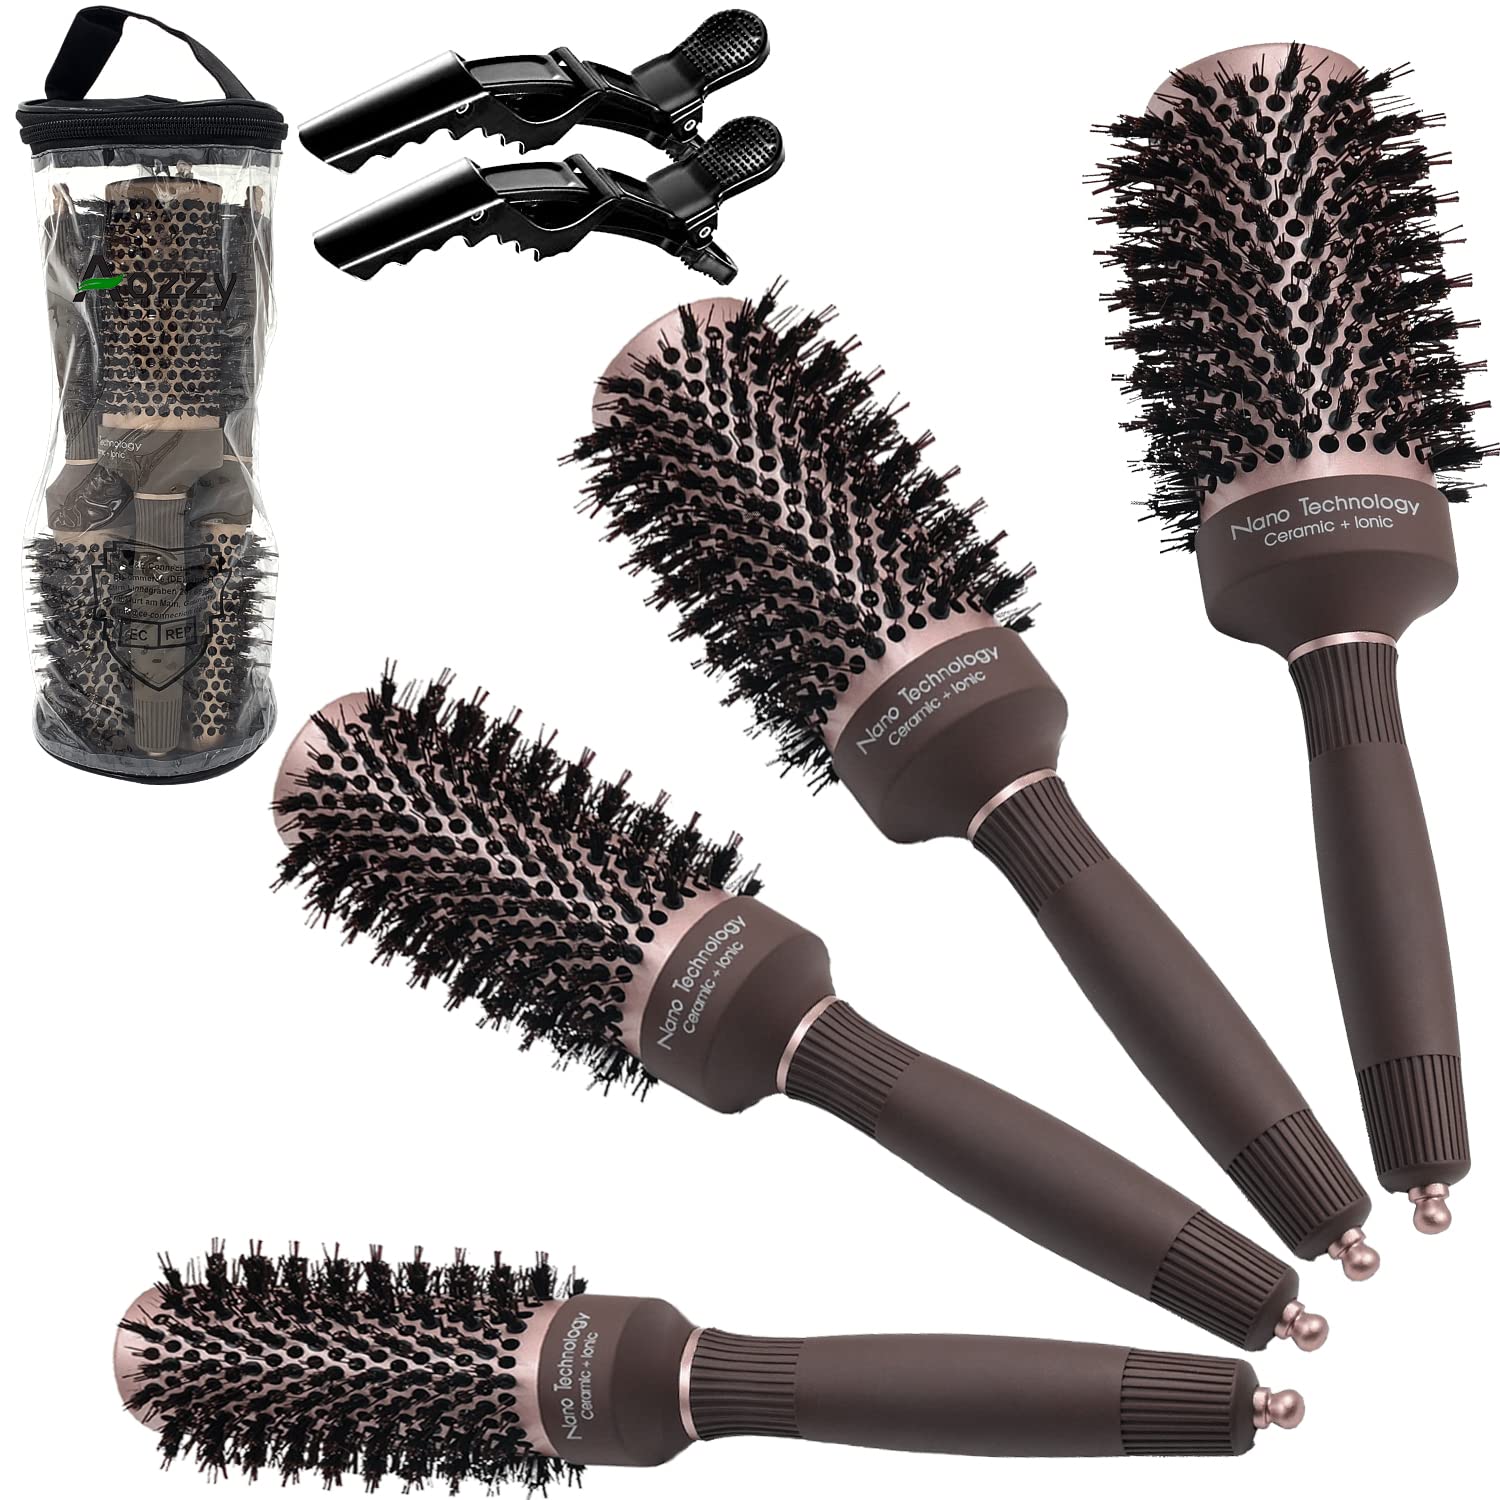 Blow Dry Round Hair Brush With Natural Boar Bristles For Blow-drying  Straightening Best Roller Brush For Long Hair Or Want Straight Wavy Smooth  Hair Cool Hair Brush For | Natural Boar Bristles